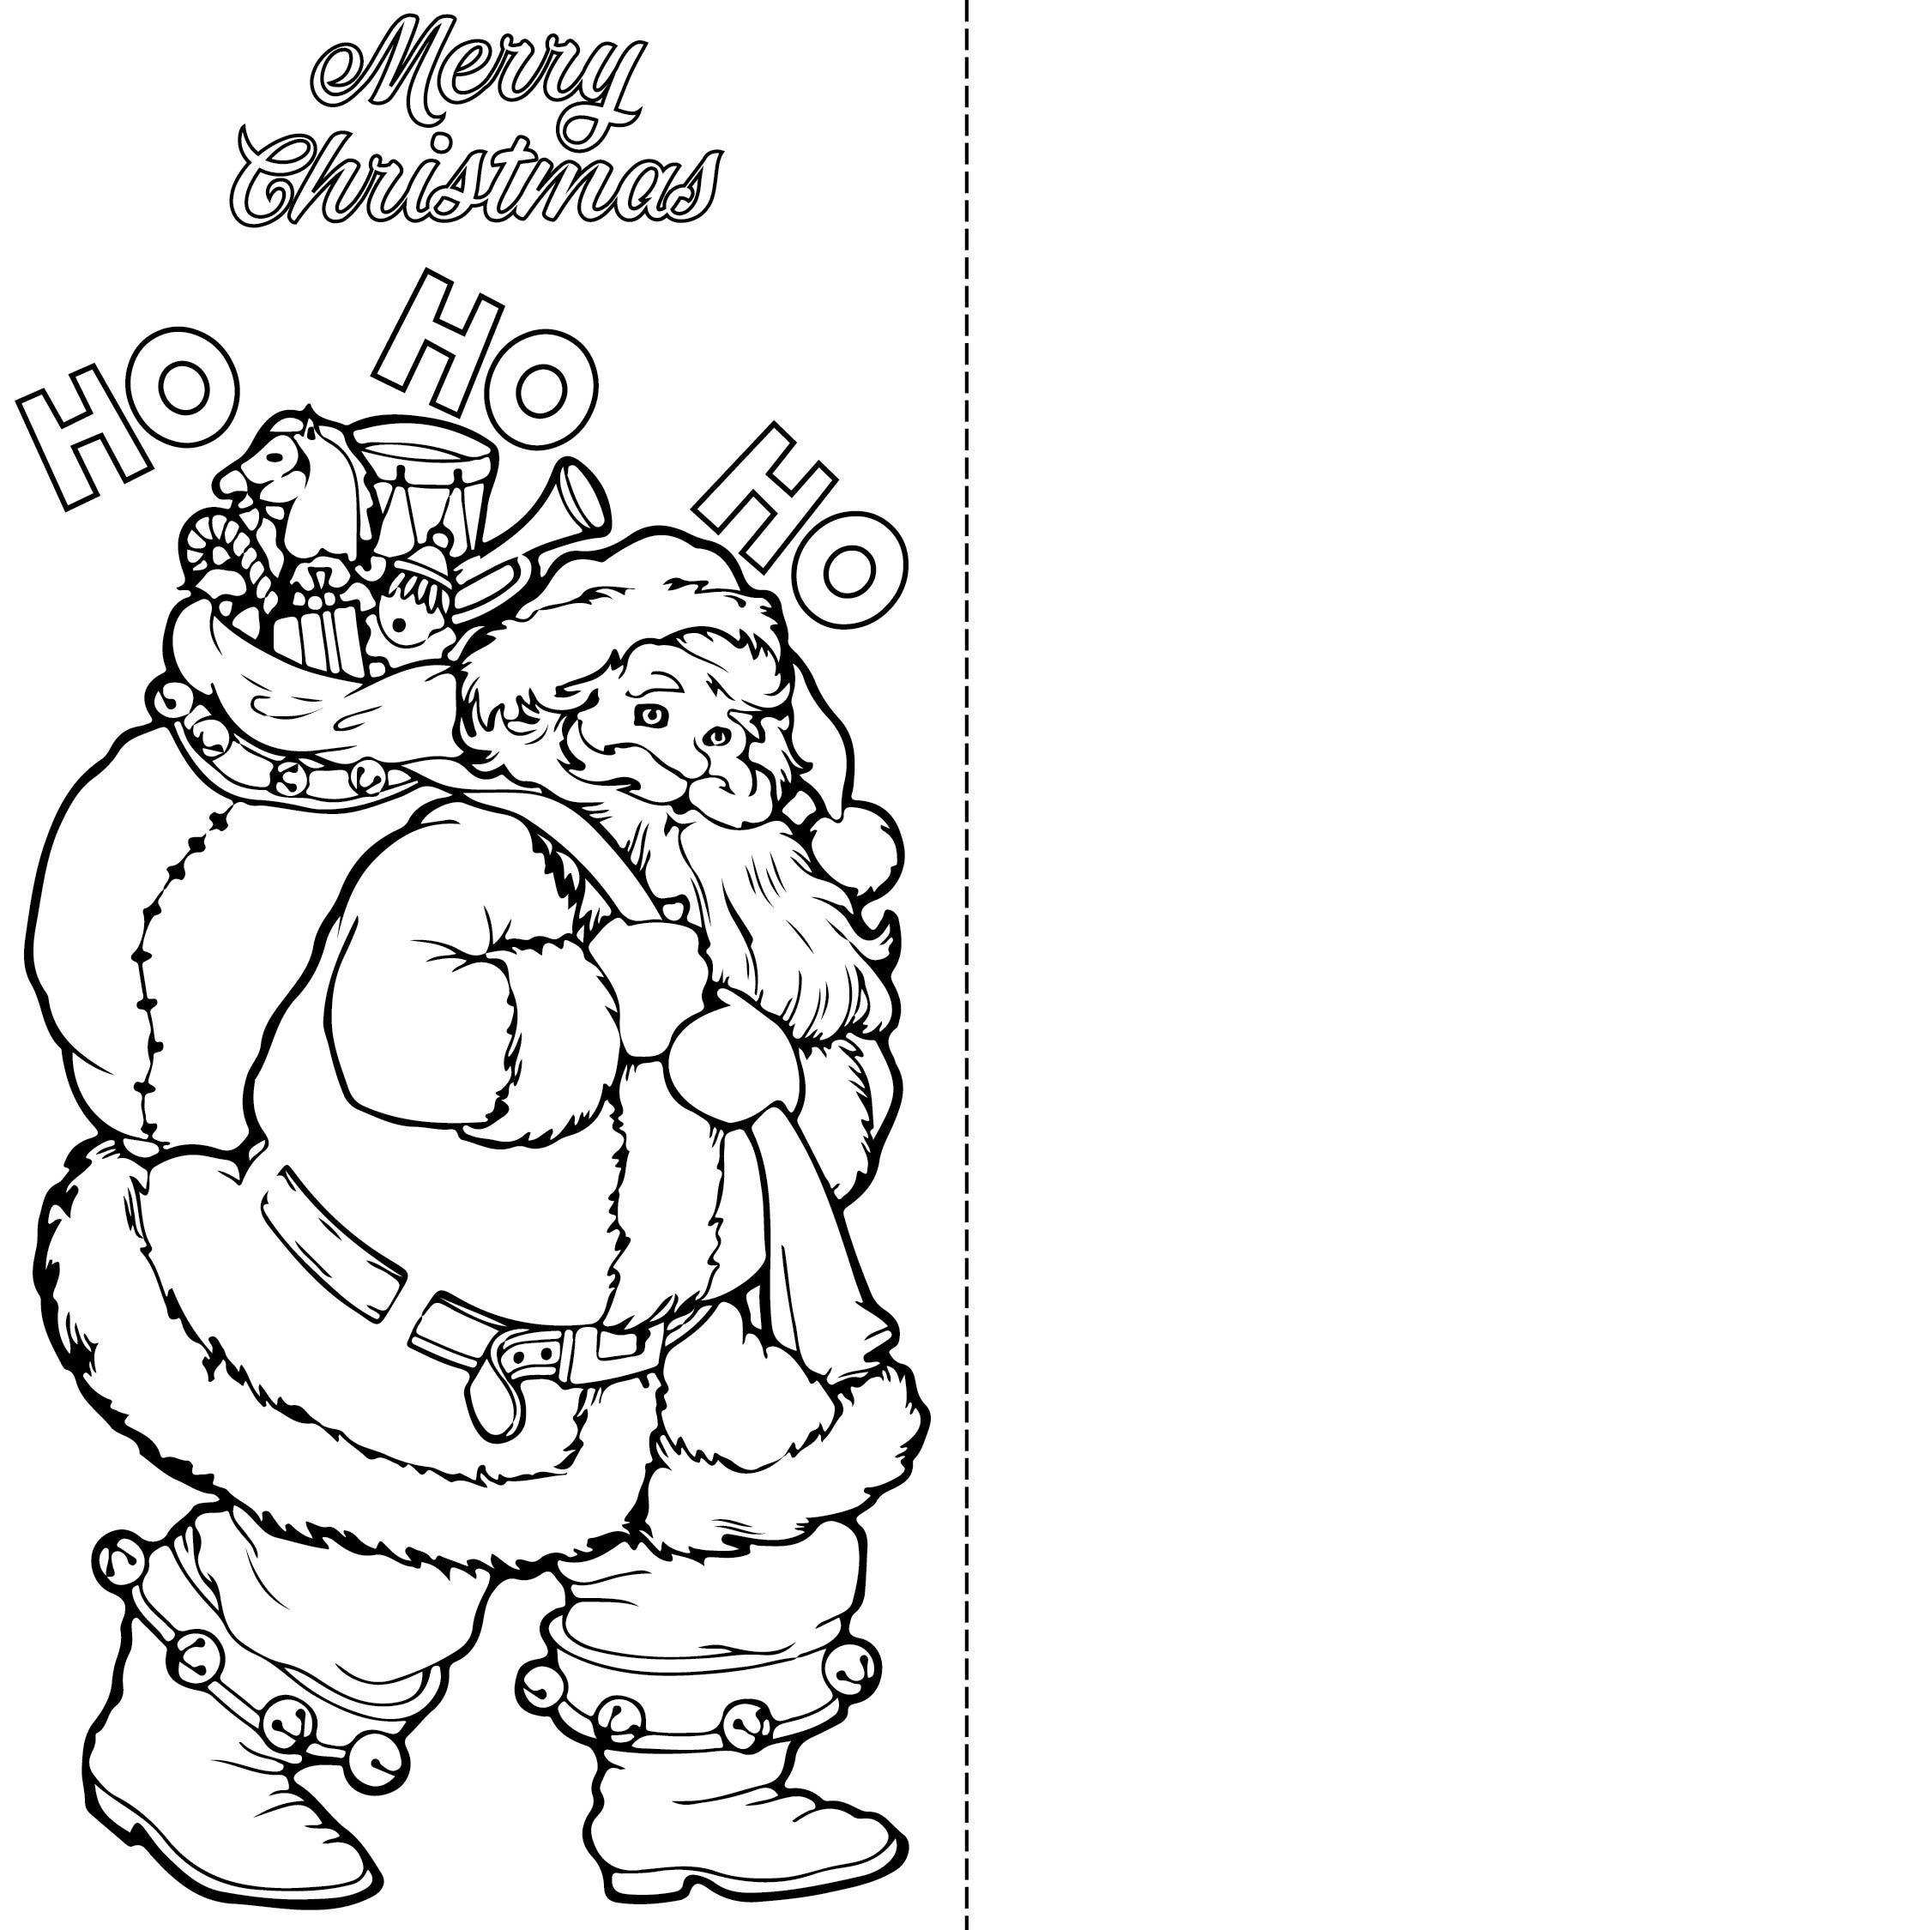 holiday-coloring-cards-coloring-pages